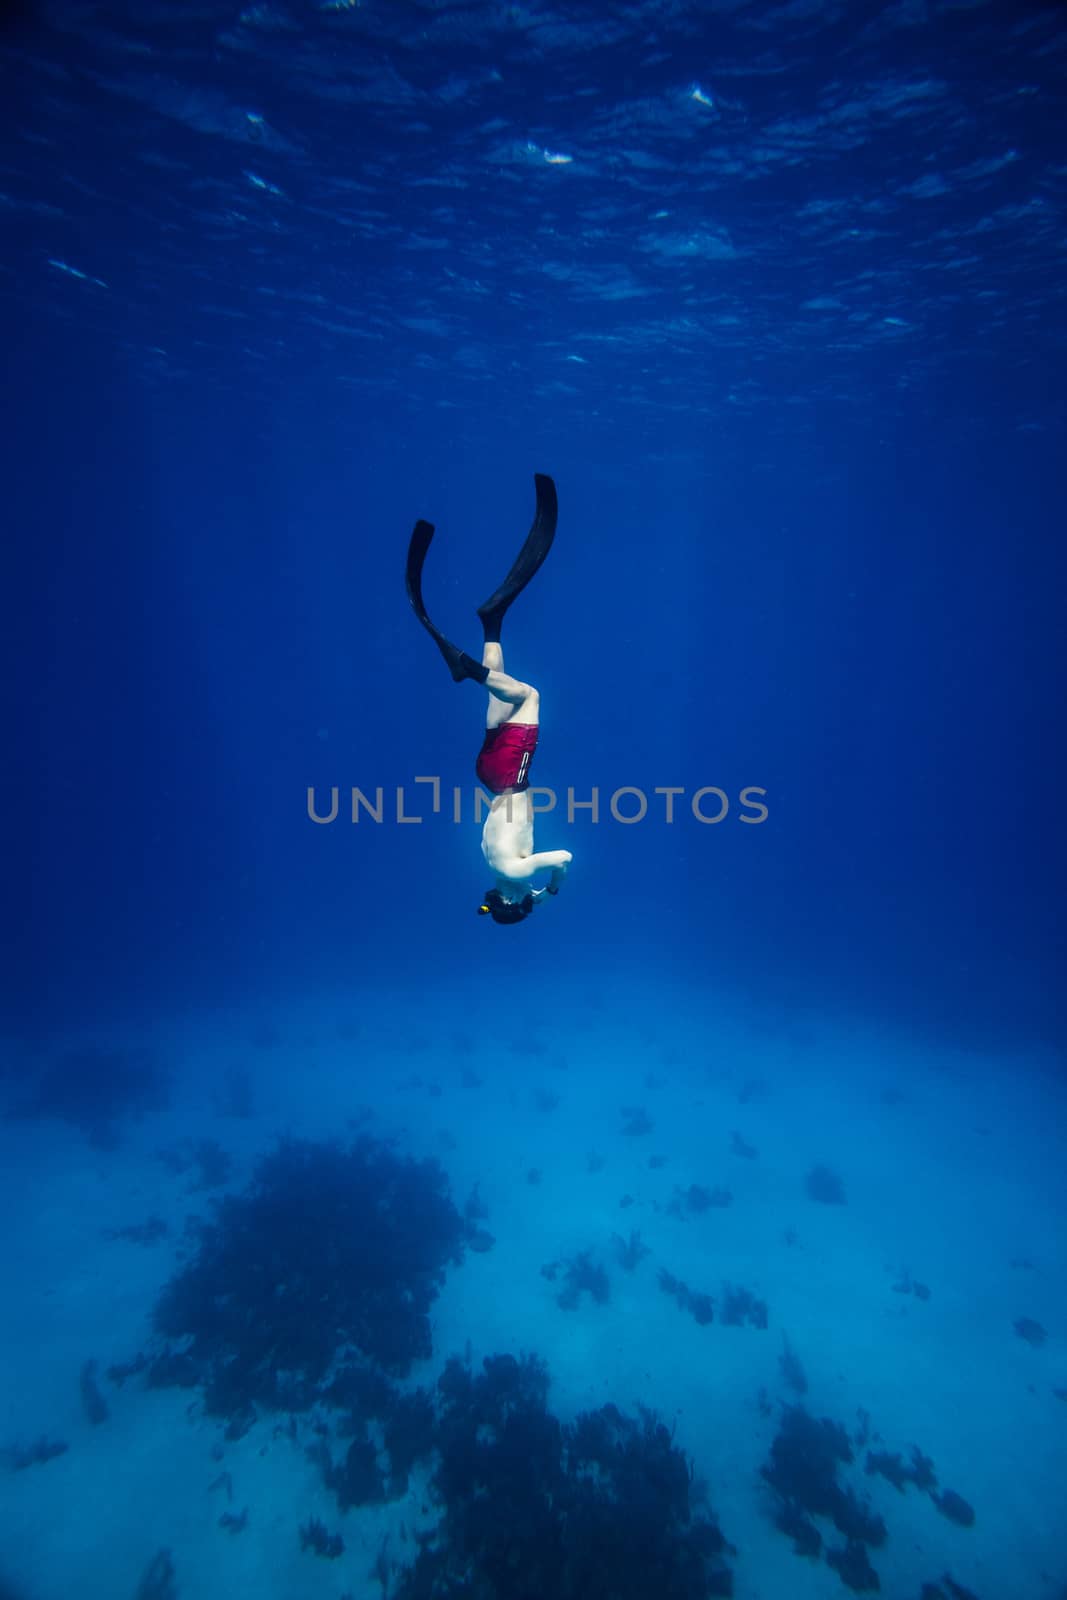 Underwater image of a Freediver with fins by aetb